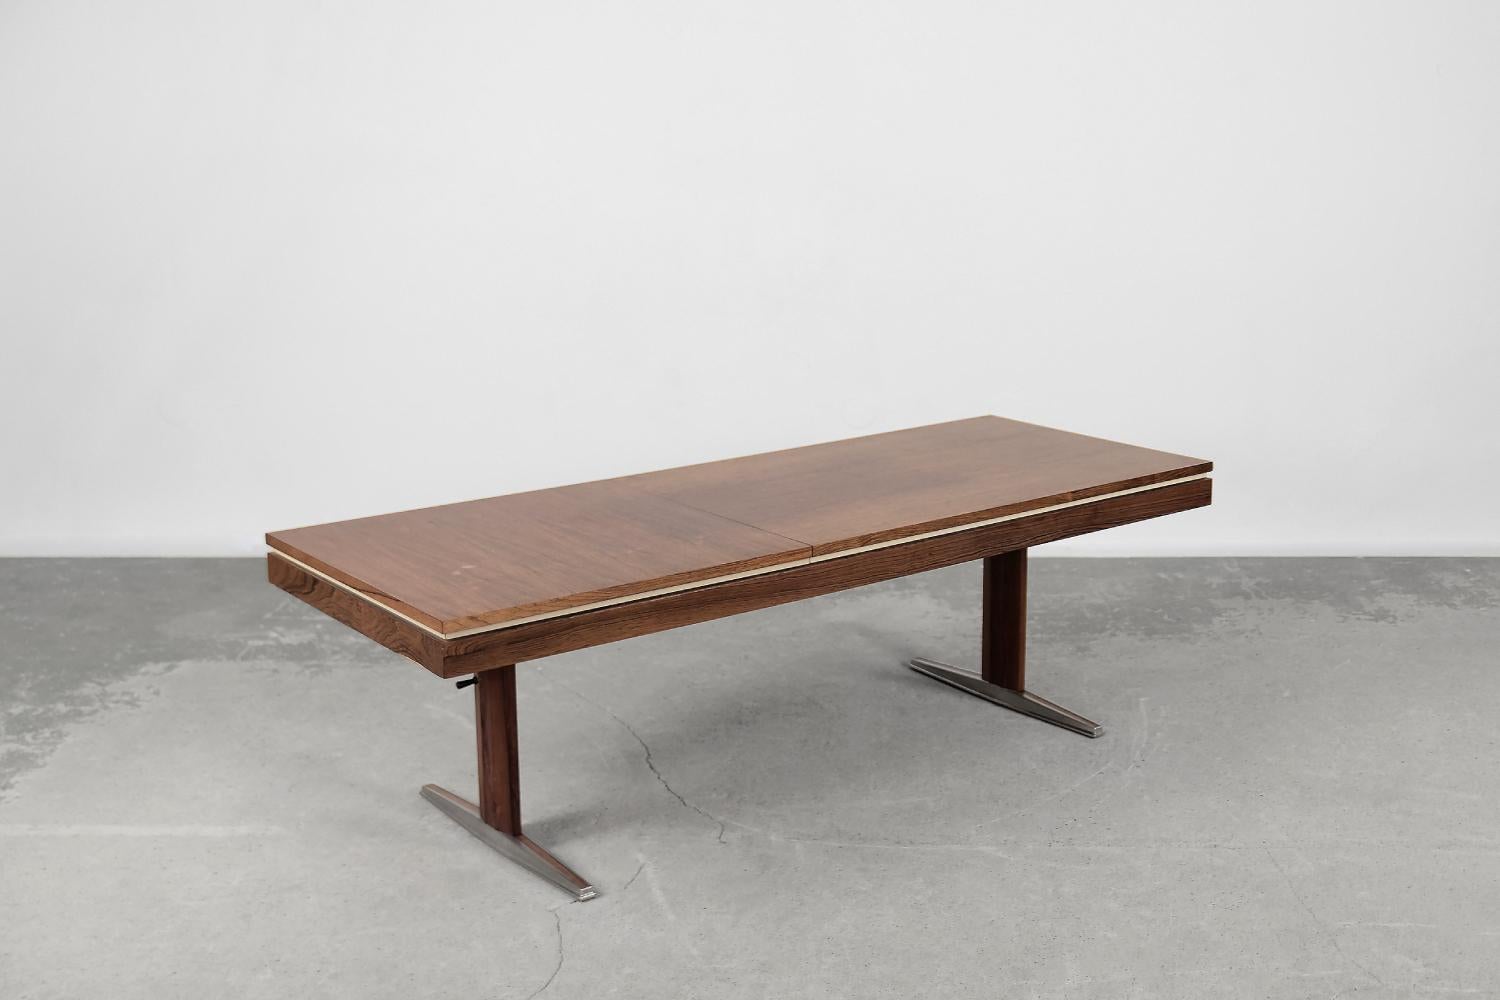 Vintage Mid-century Modern German Rosewood Adjustable Table from E.M.U, 1960s For Sale 7